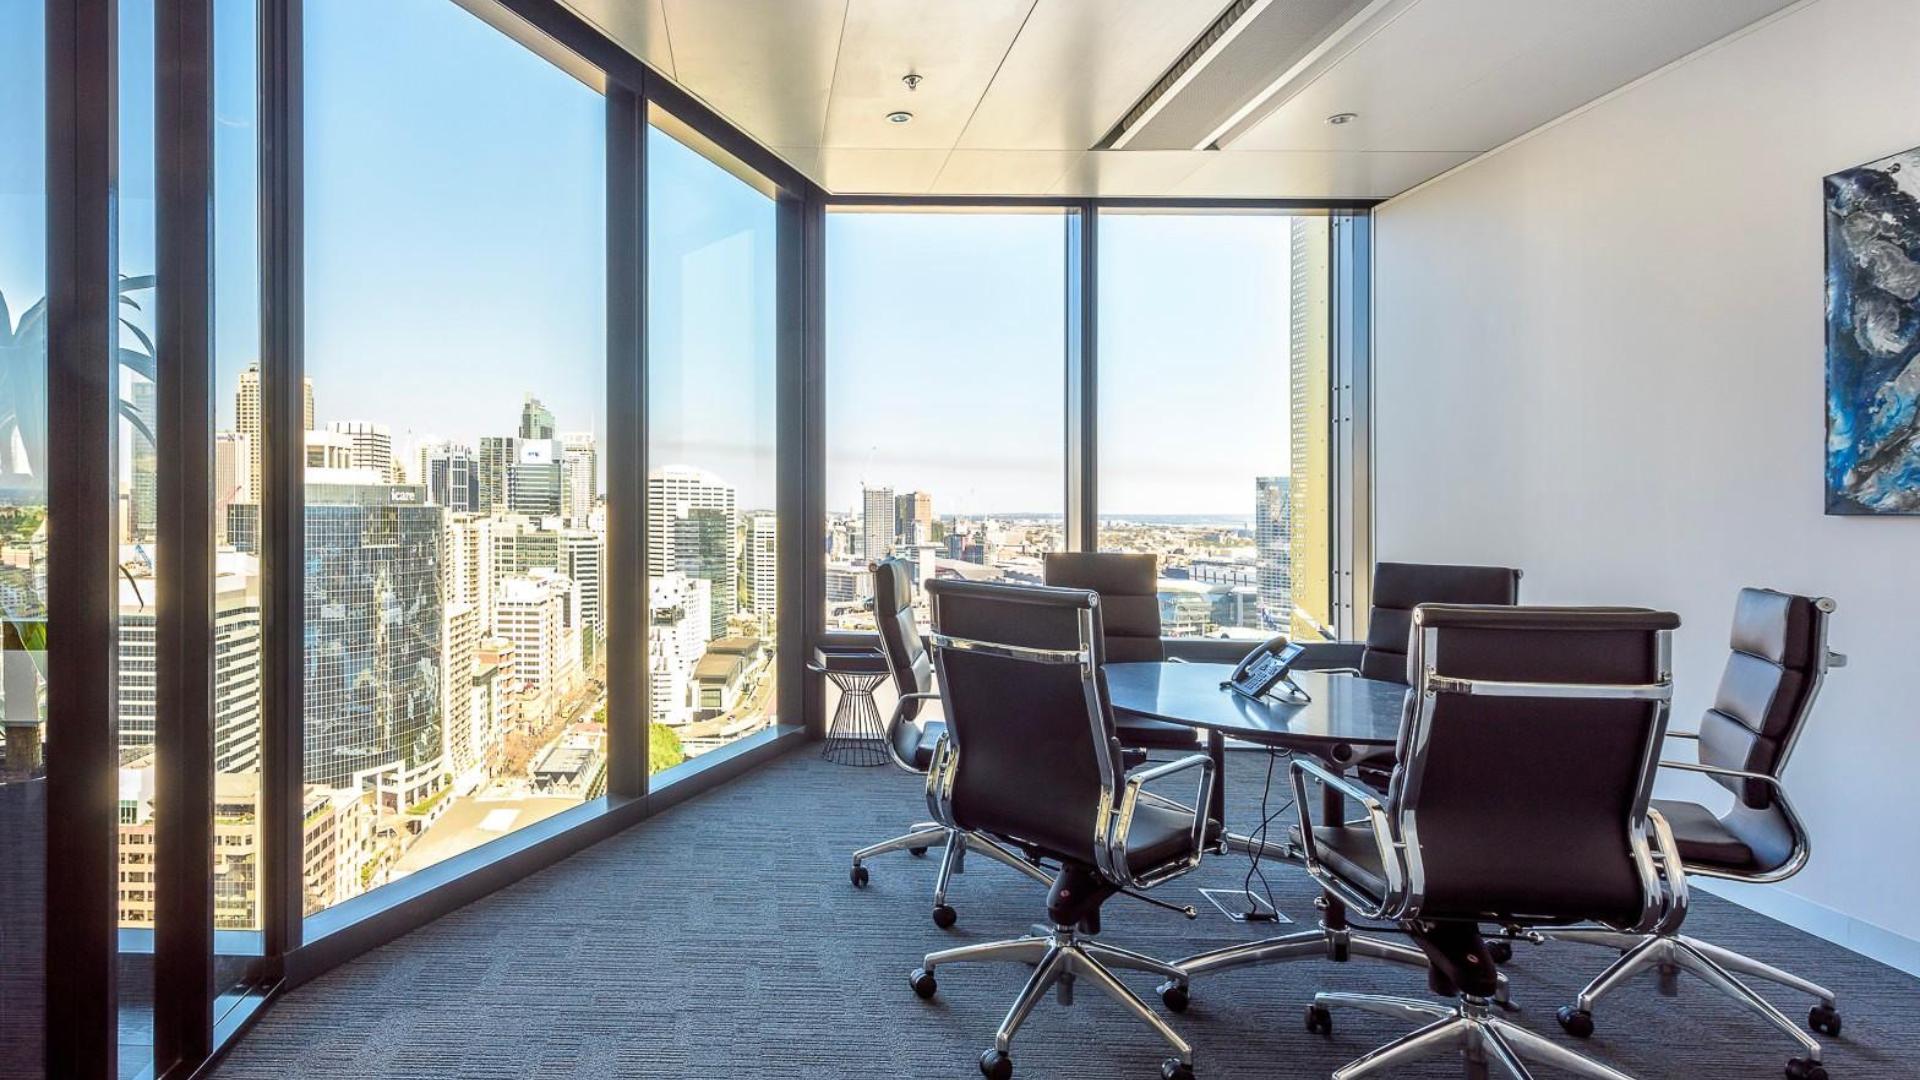 Small Meeting Rooms for Hire in Sydney